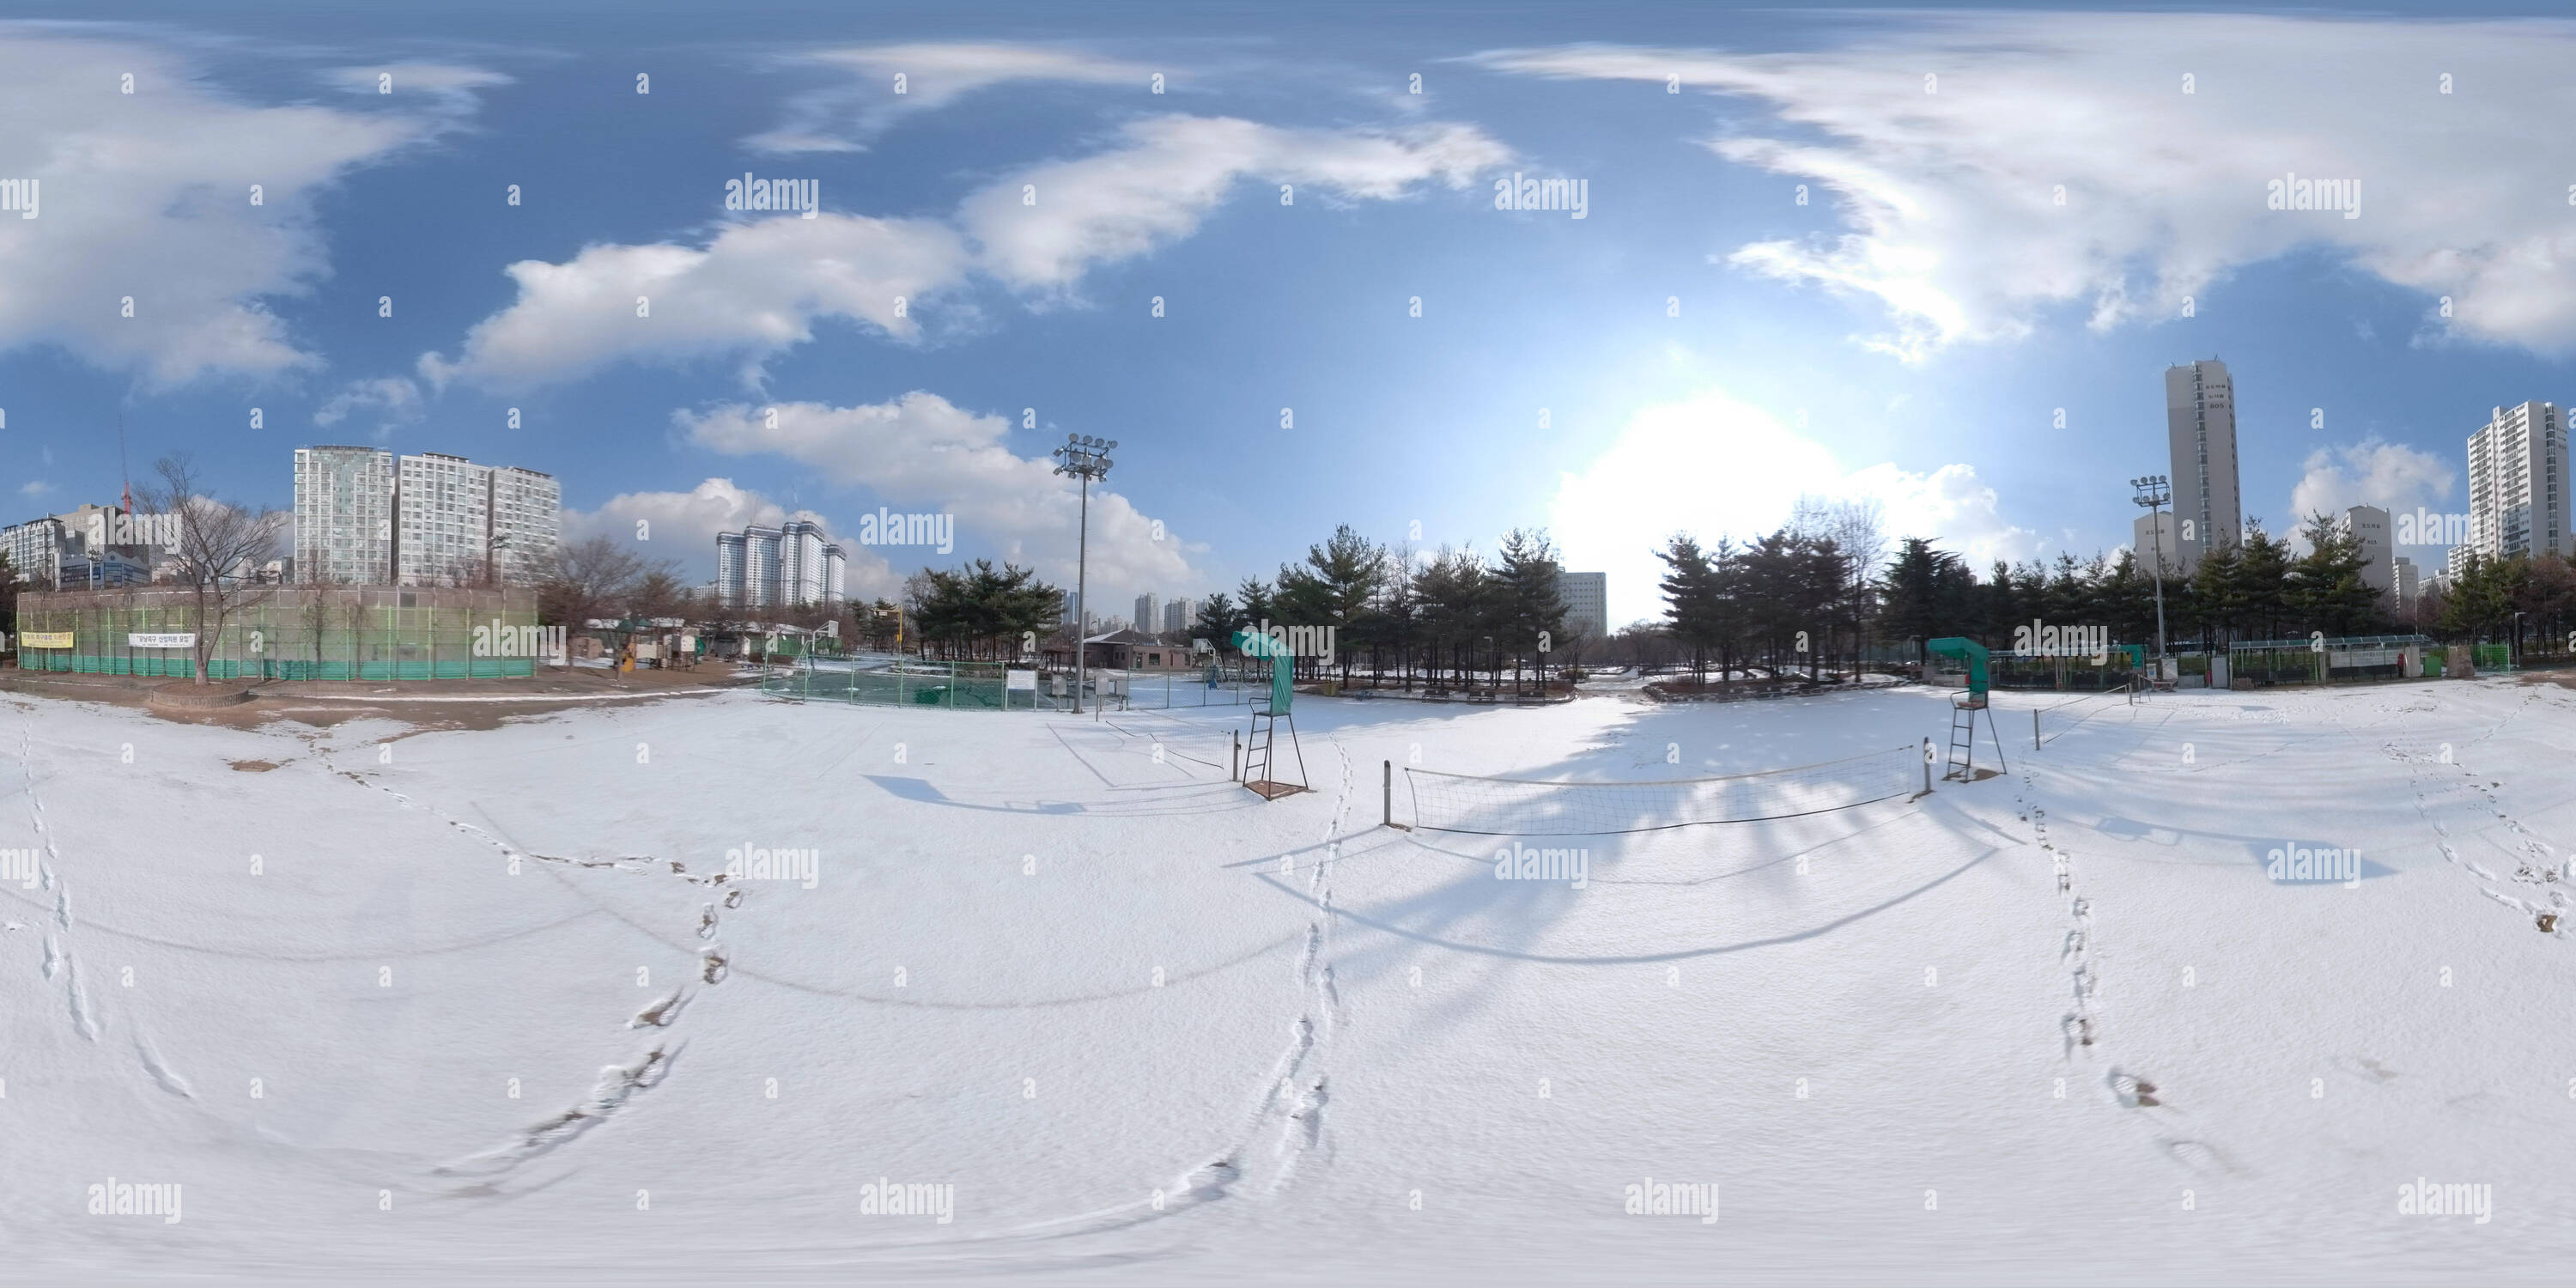 360 degree panoramic view of BUCHEON, SOUTH KOREA - December 13, 2018:  Panorama 360 degrees angle view of snow-covered park on a sunny day.